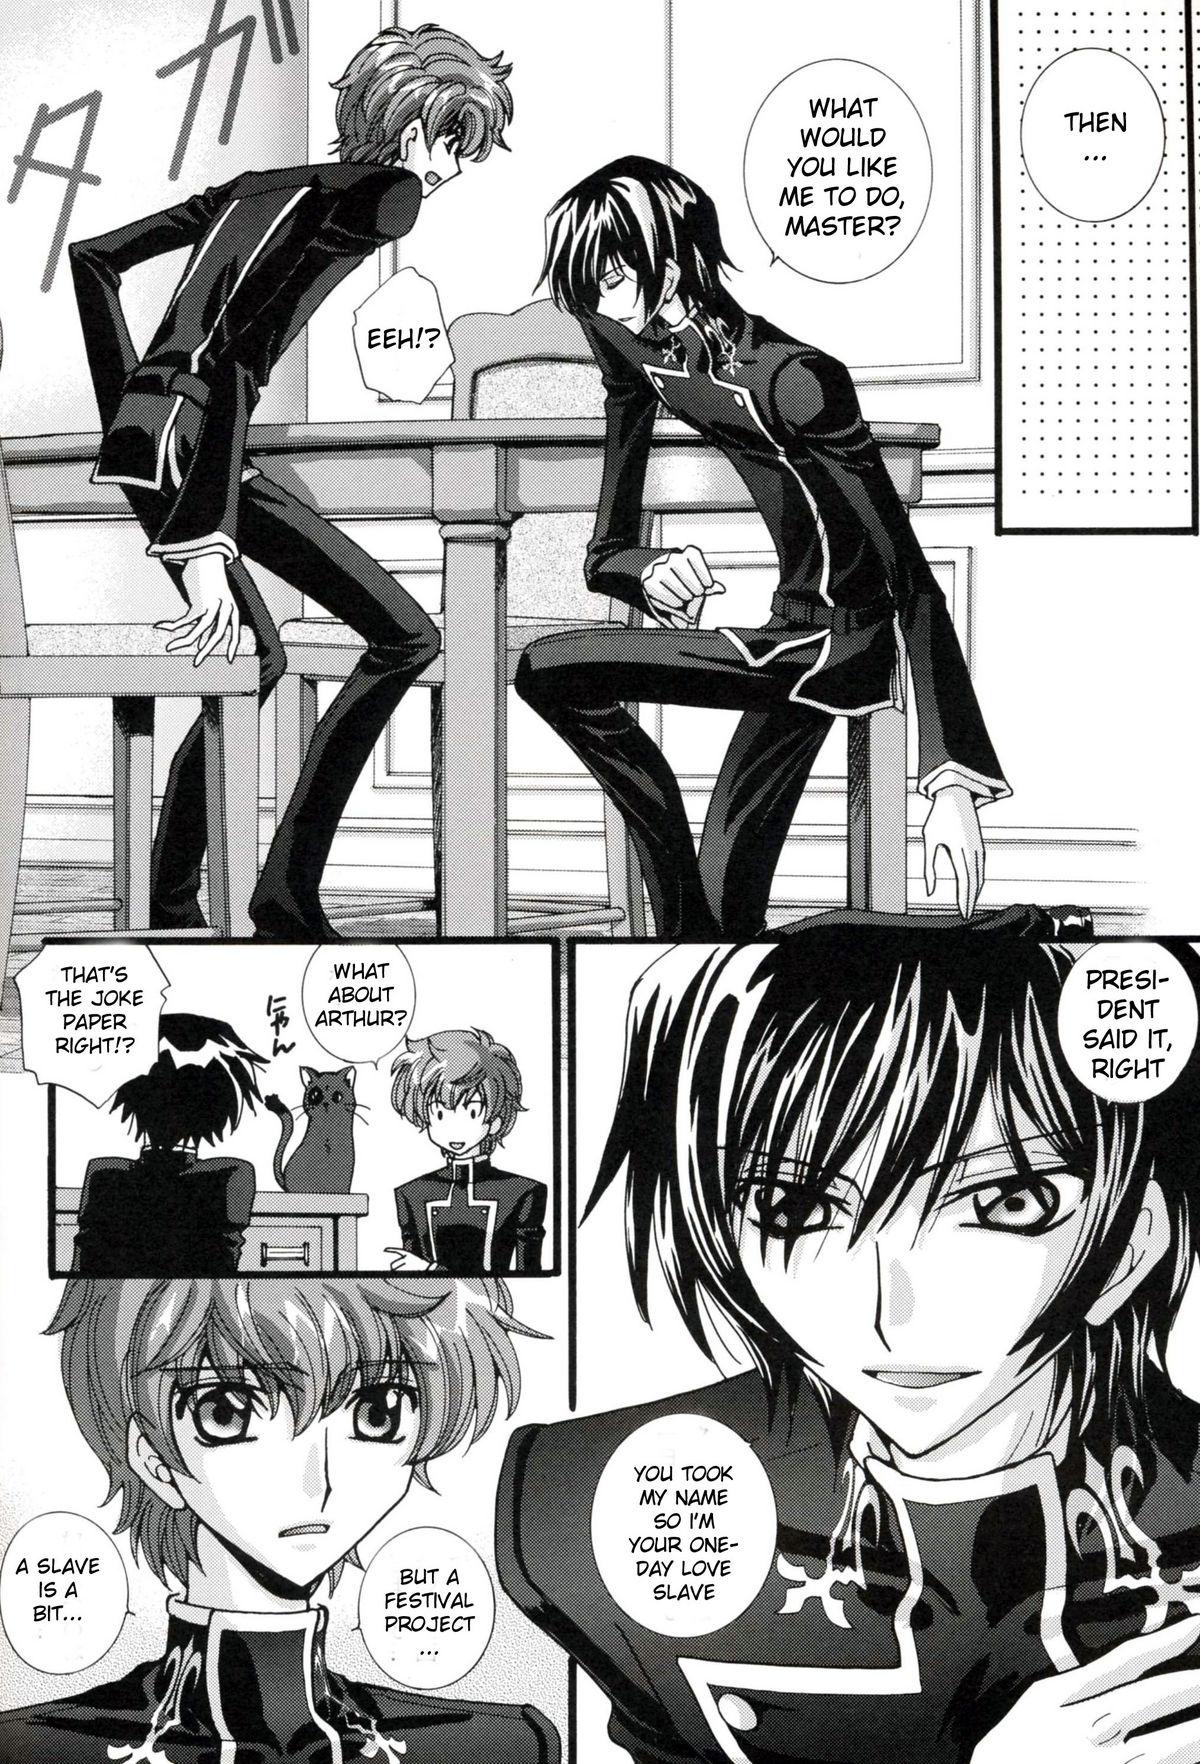 Babes Lupercalia2017 - Code geass Gay Cut - Page 5